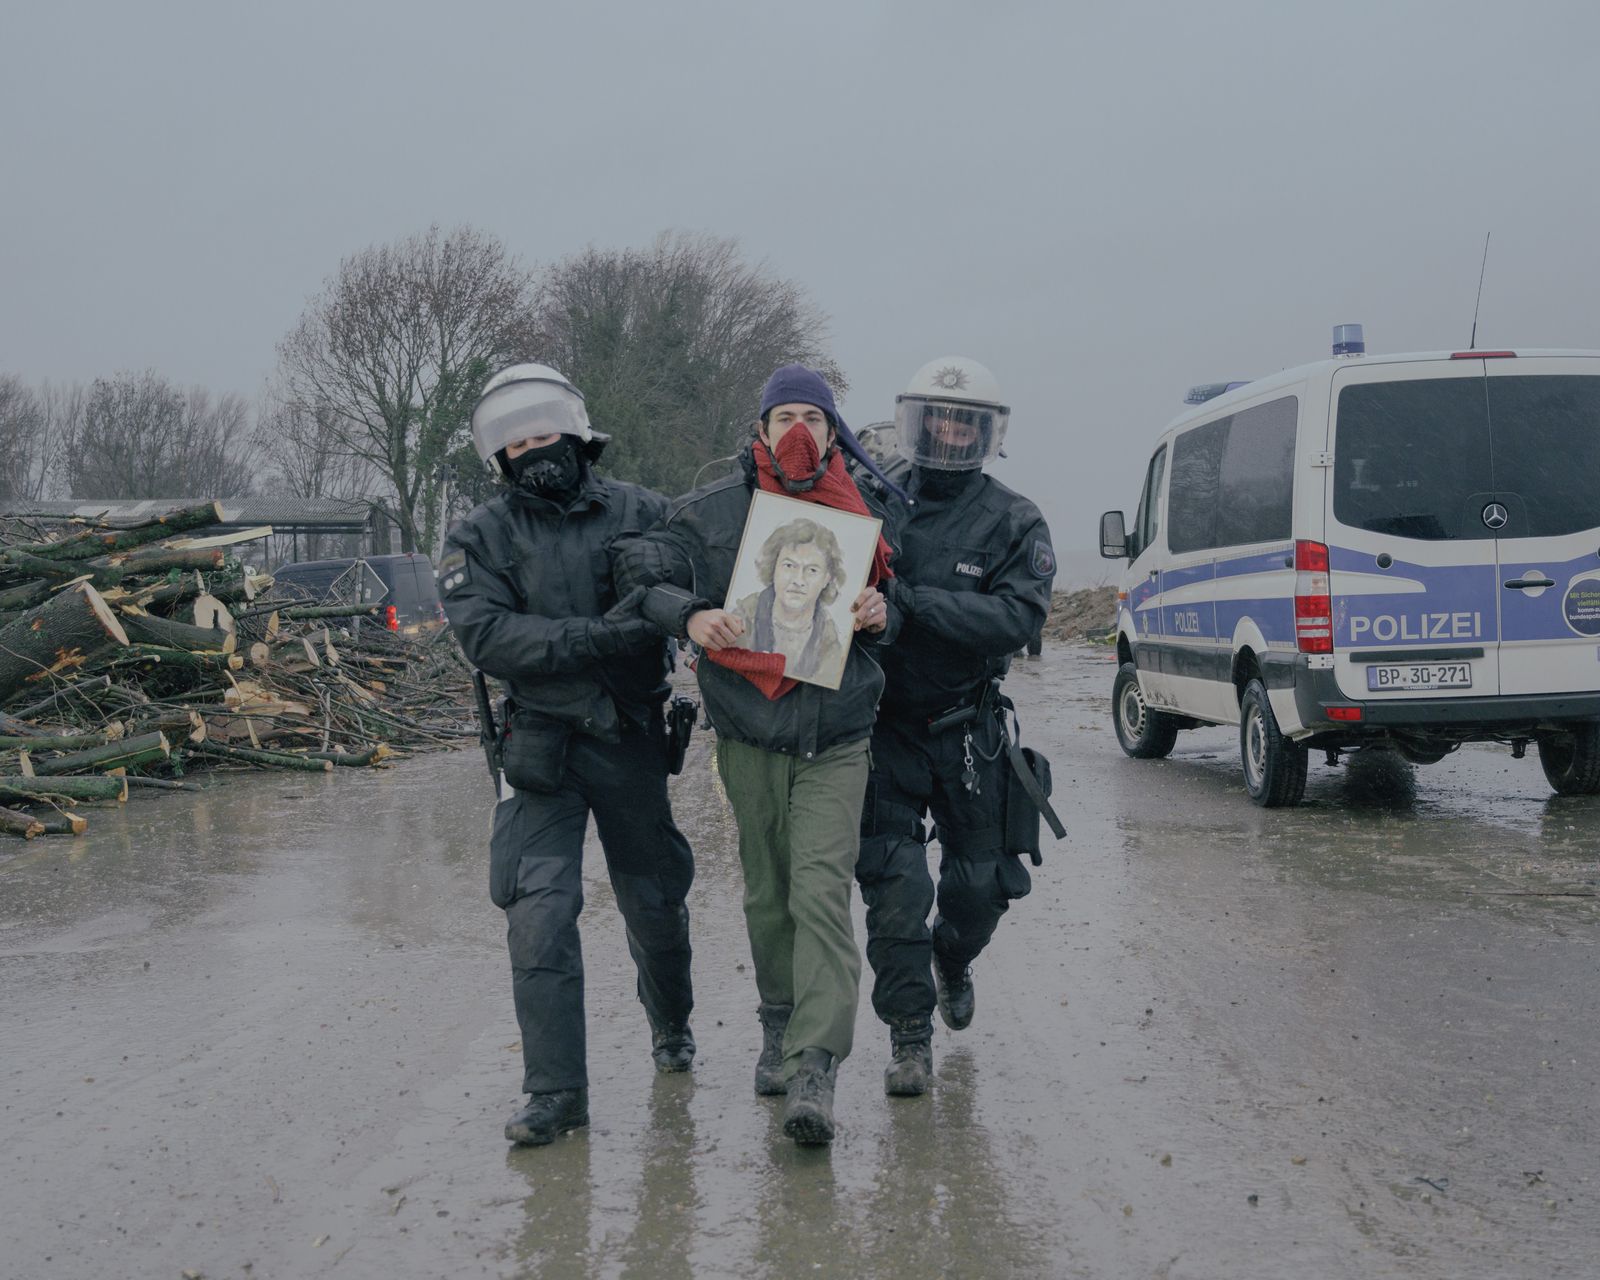 © Ingmar Björn Nolting - Image from the Eviction photography project